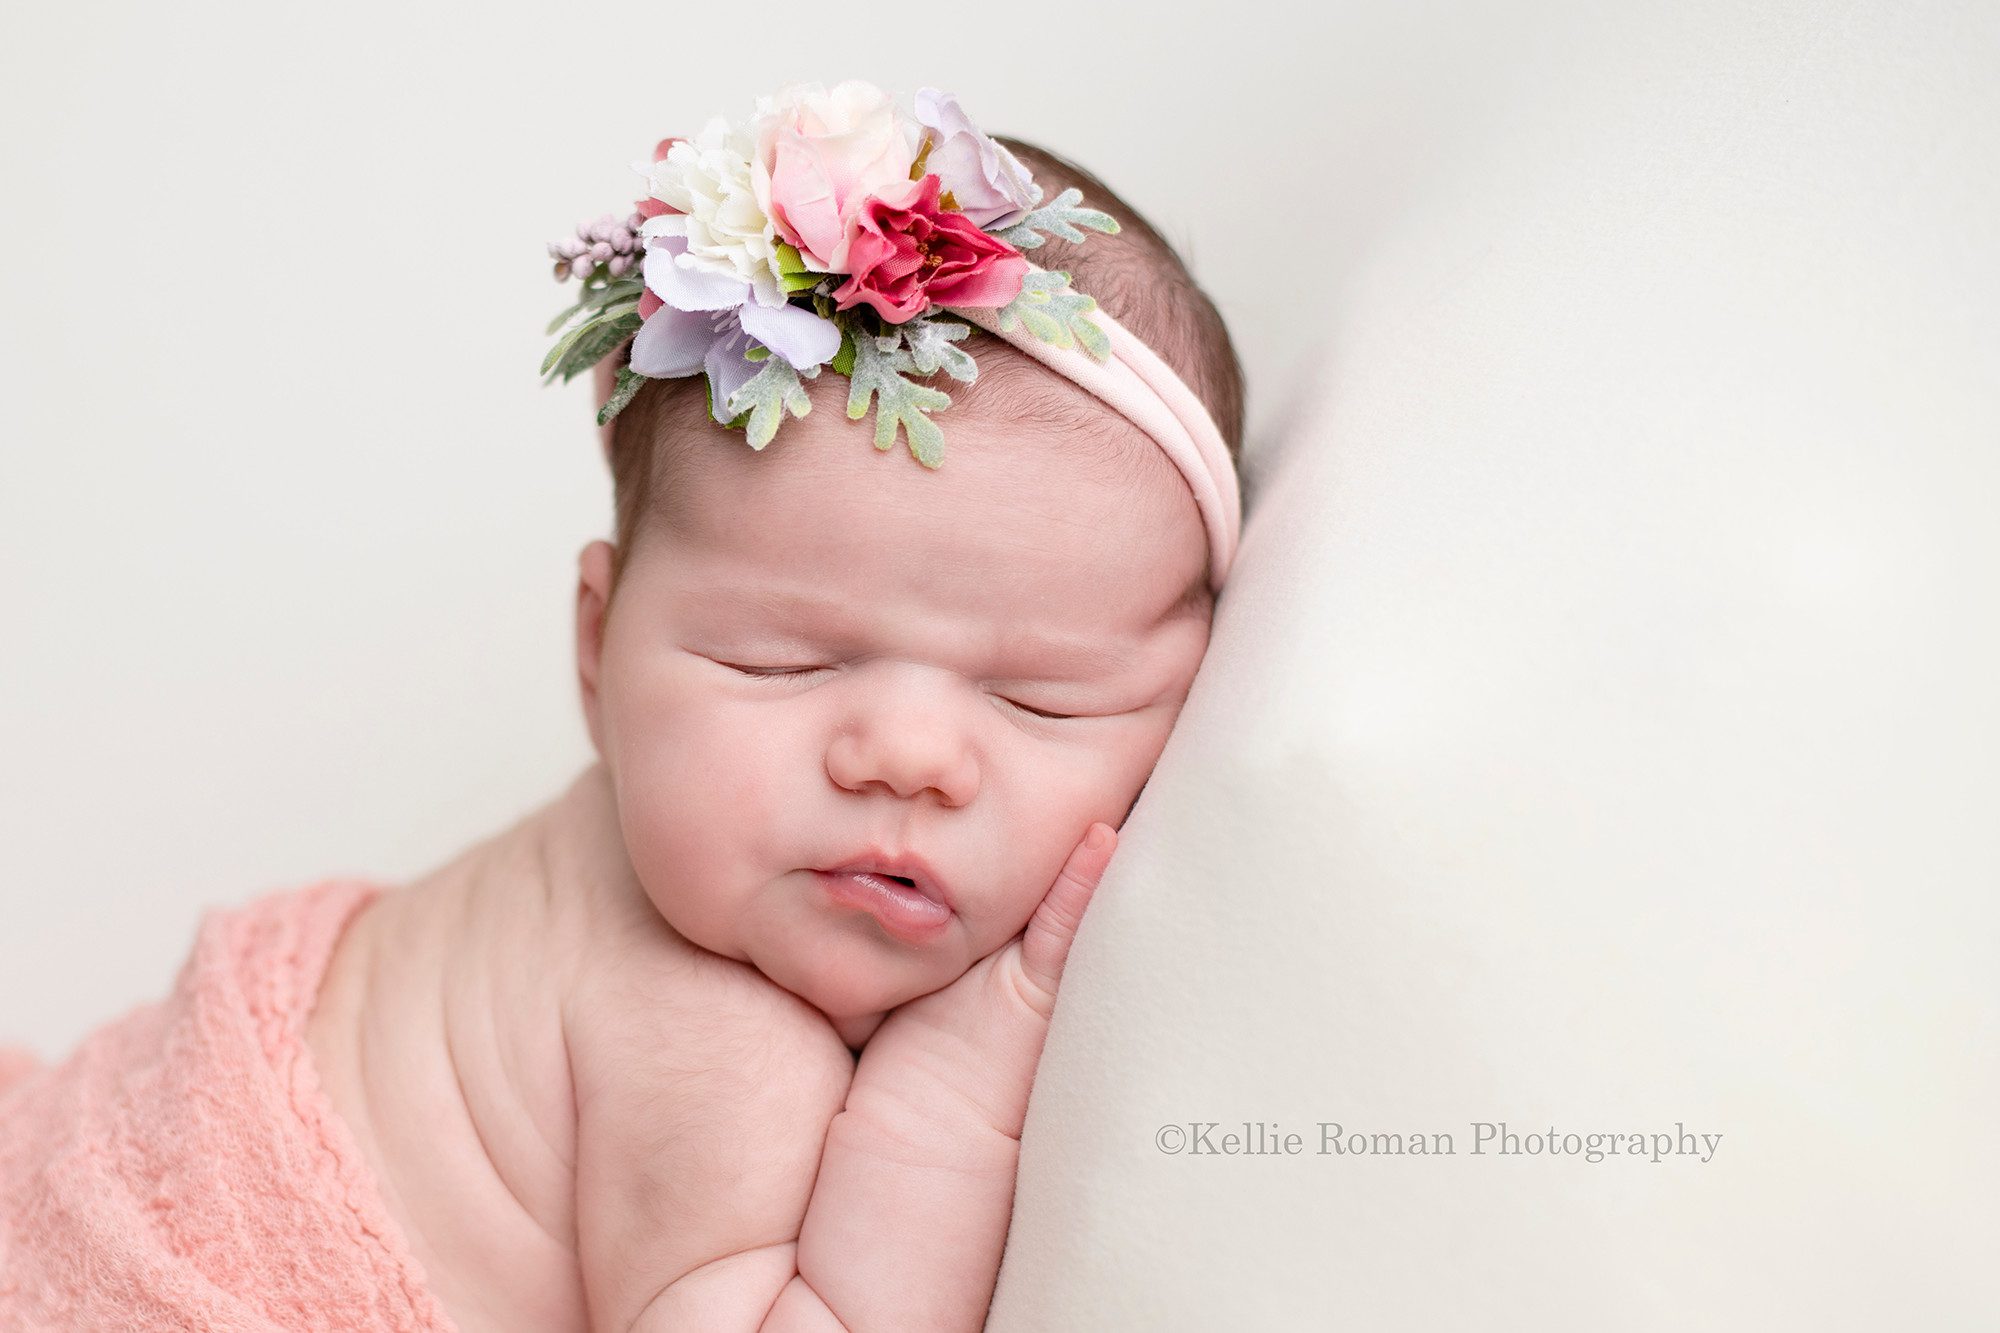 baby photos in milwaukee photographer studio a baby girl posed with her hand under her chin on top of a cream colored blanket she has a floral pink and purple headband on and is sleeping on her belly